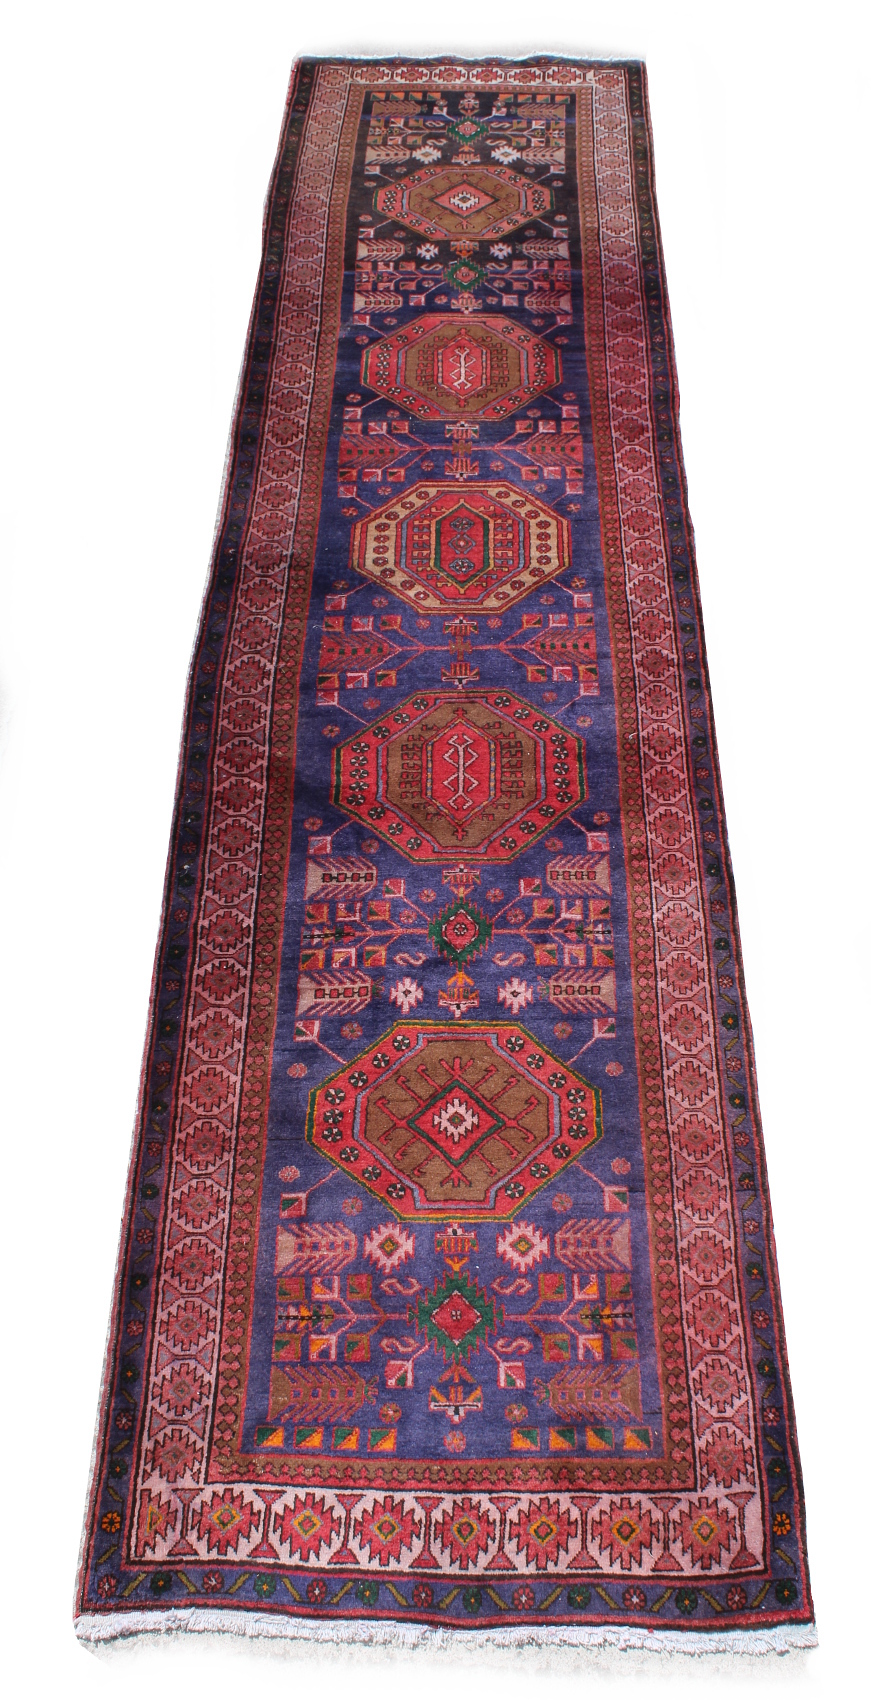 An Esari woollen hand-made carpet with blue ground, 160 by 42ins. (405 by 107cms.).